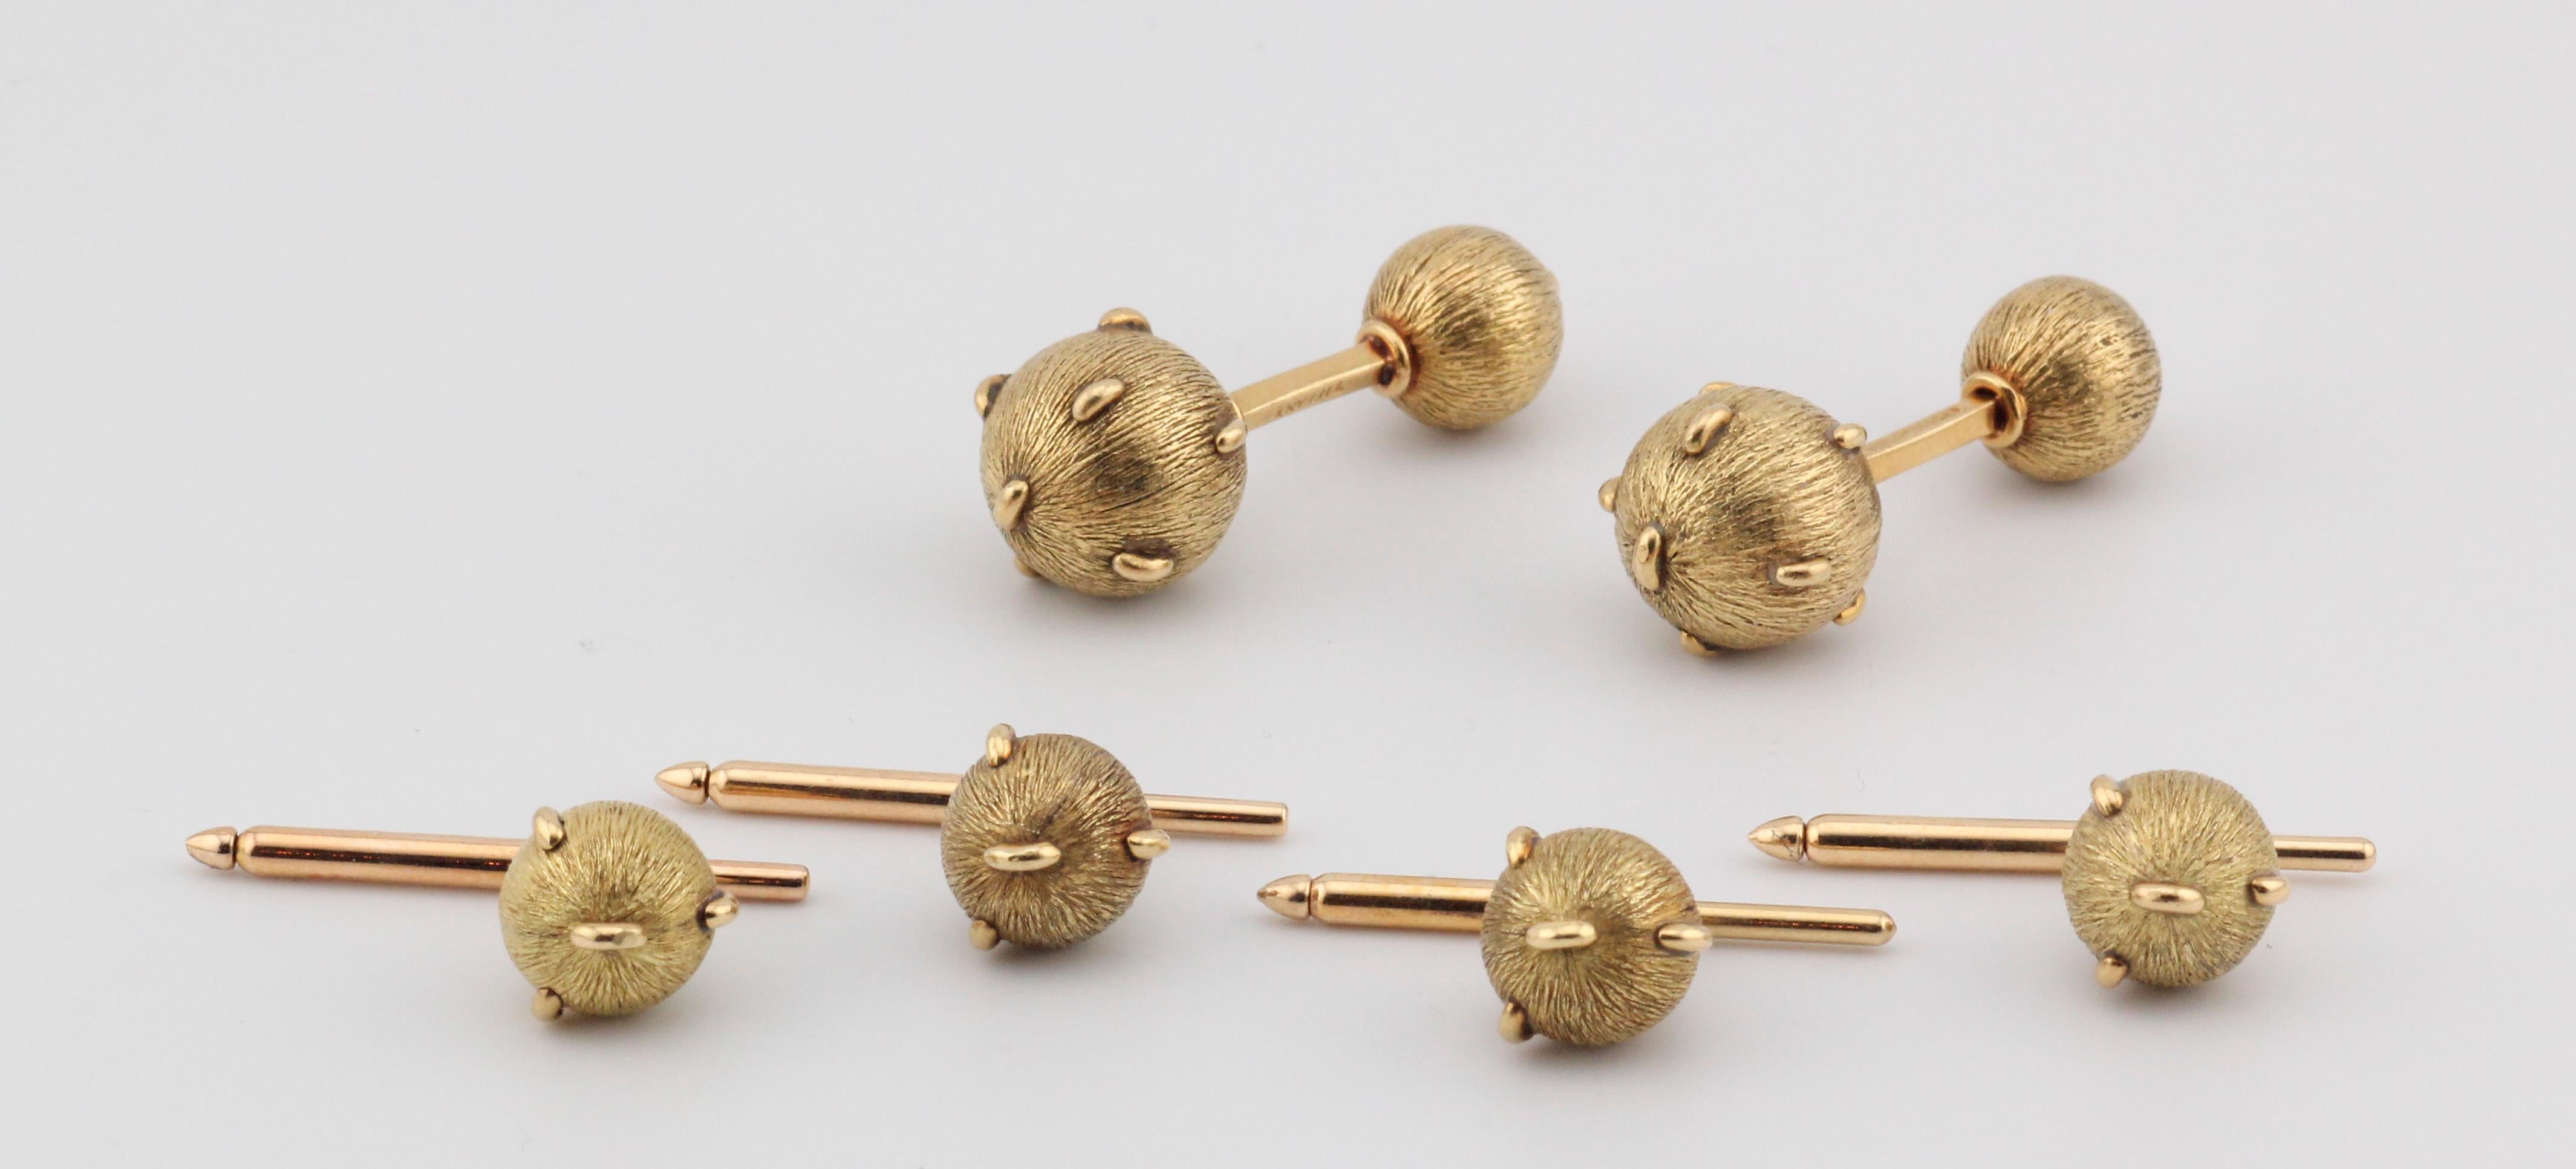 Step into the timeless elegance of the 1980s with this exquisite set of Tiffany & Co. Schlumberger studded and textured 18k gold cufflinks and studs. Designed by the legendary Jean Schlumberger, these pieces are a true testament to his iconic style